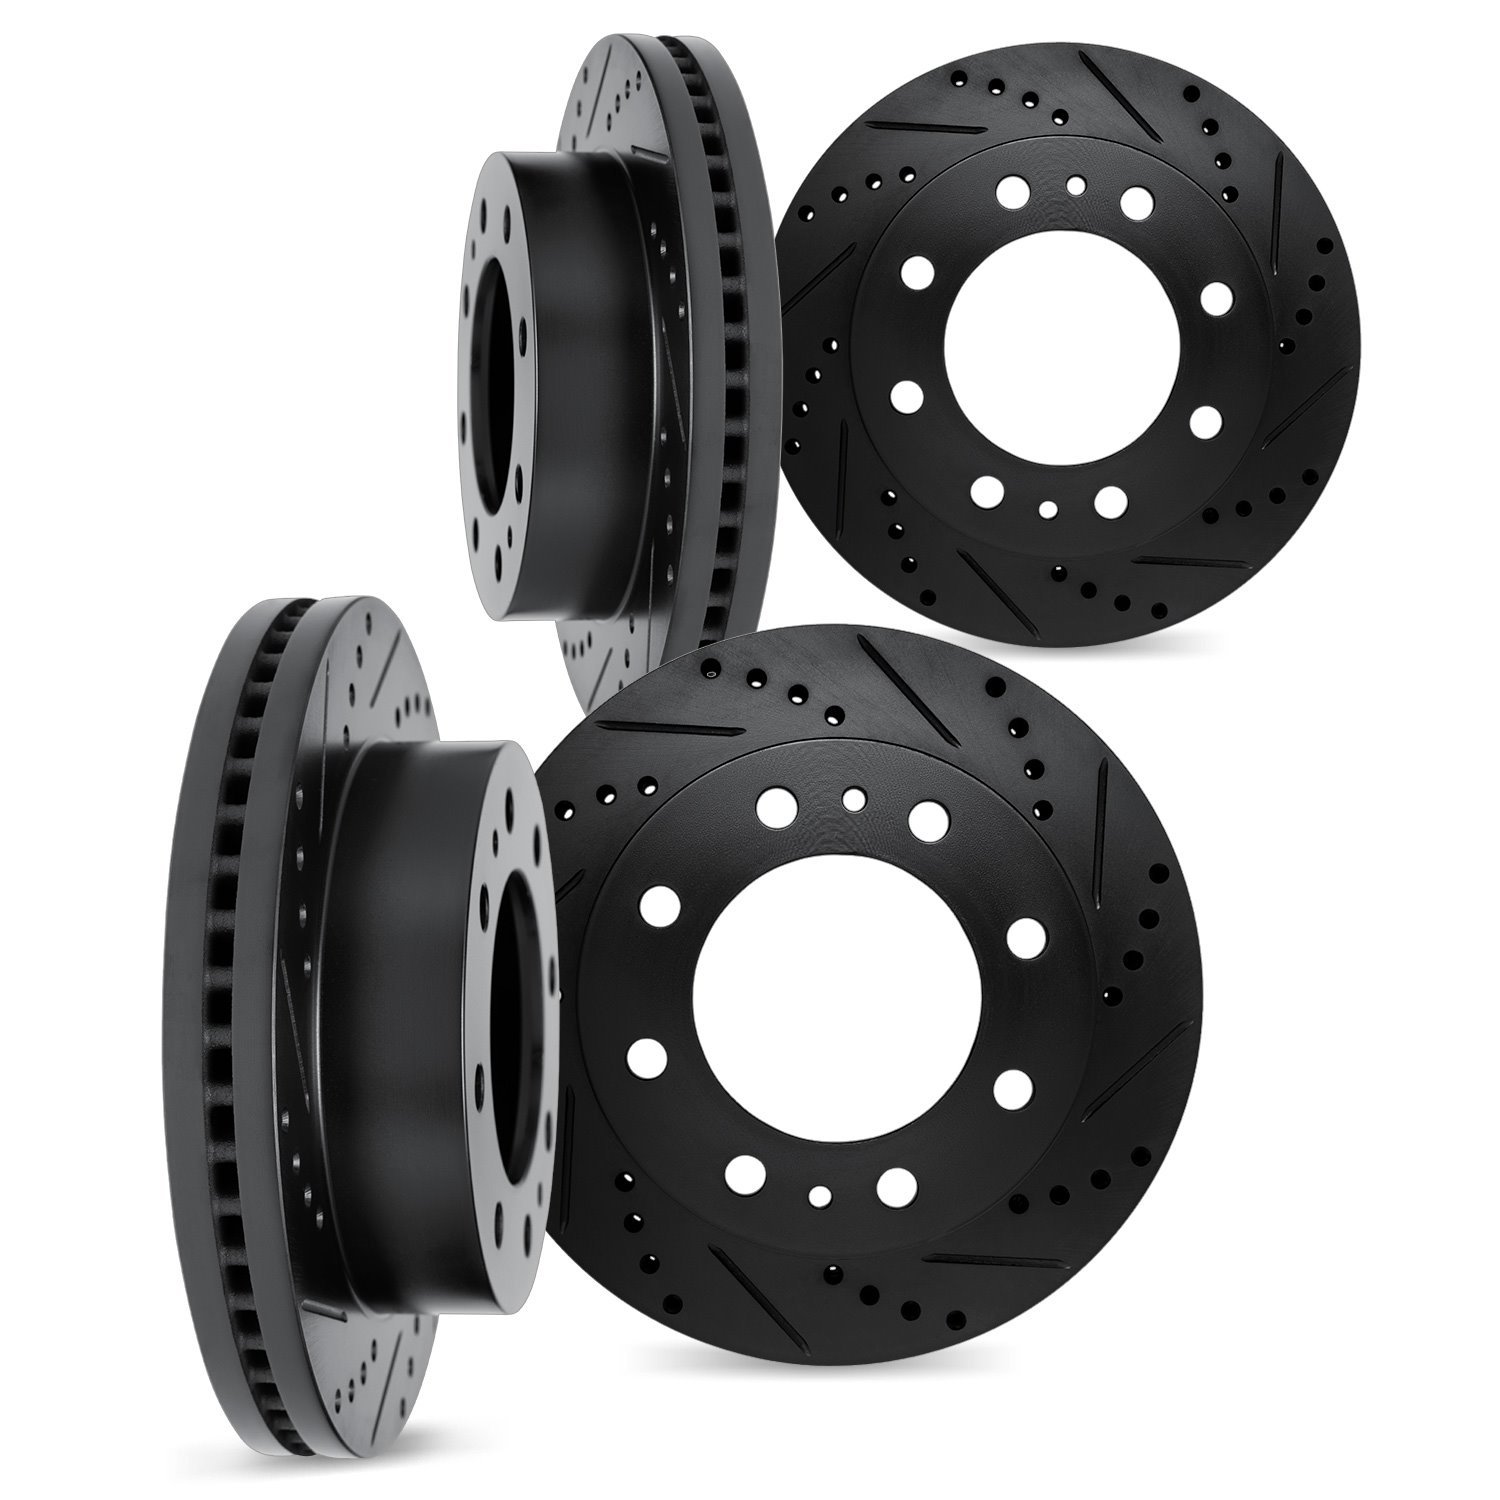 8004-48099 Drilled/Slotted Brake Rotors [Black], Fits Select GM, Position: Front and Rear